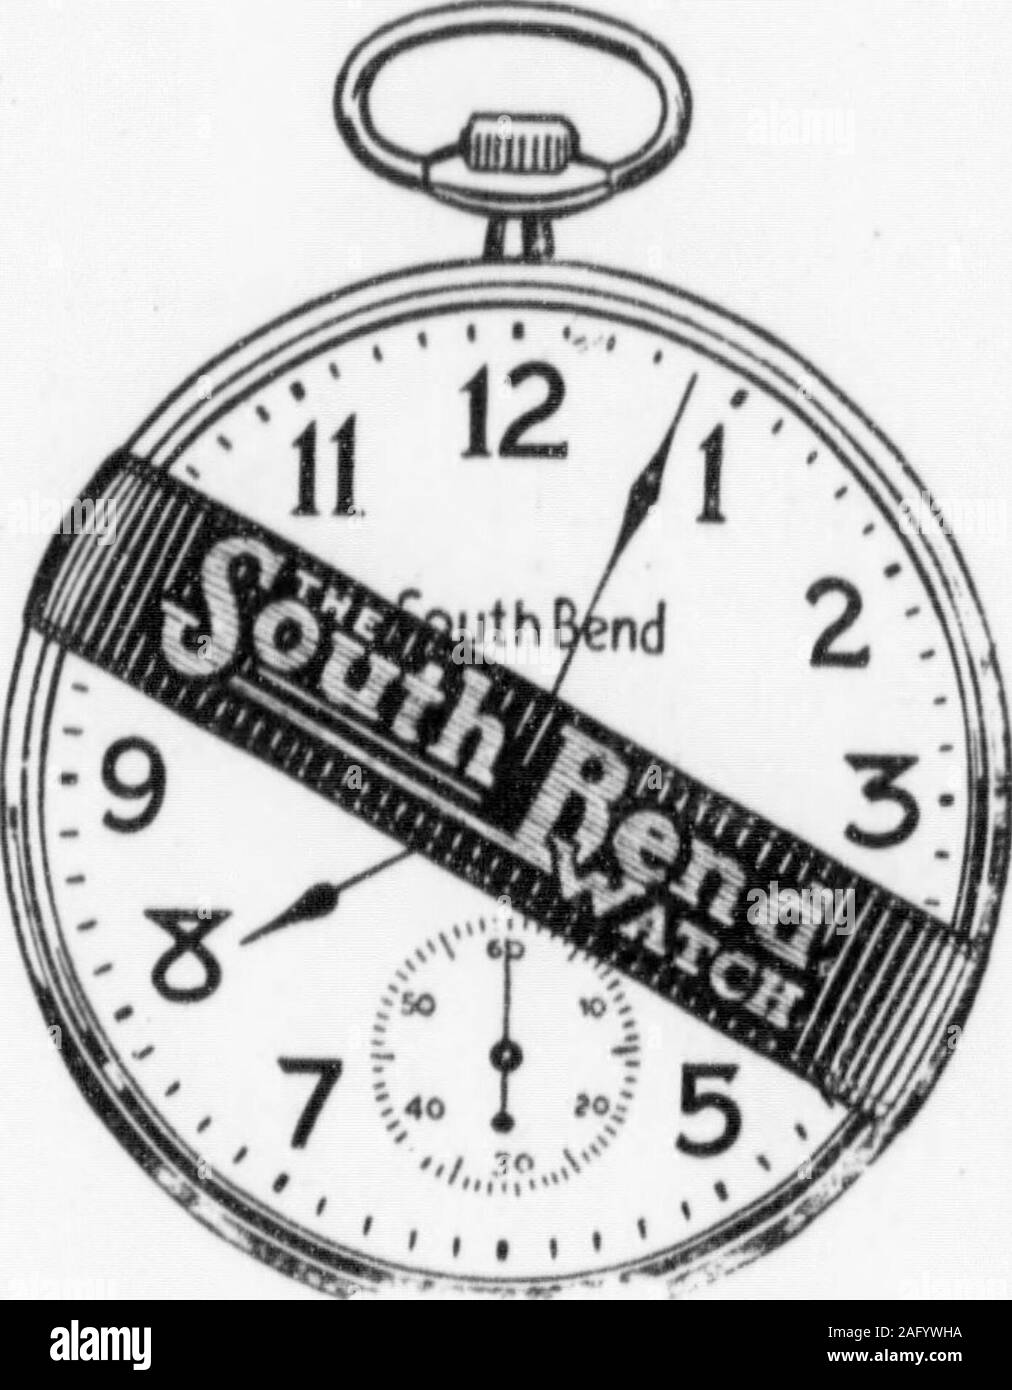 . Highland Echo 1915-1925. ?to Ml.... We Havk Just Received Some Attractive New Models in South Bend Watches See our Speciai. Window Display This Week. HOPE BROS. Inc. Jewelers and Stationers Maryville PERSONALSDr. and Mrs. W. P. Stevensonare entertaining at The House inThe Woods, Mrs. Alexander F.Denniston and Miss Allen Bourn ofYonkers. Mrs. Stevenson gave atea Monday afternoon in honor ofher guests. Mr. and Mrs. Rolf Rankin, 1917,are the proud parents of a son,Robert Creswell. Mr. Rankin is aprofessor in the Dwight IndianTraining School, Marble City, Okla-homa. CAMPUS QUIPS Anne C.: Why on Stock Photo